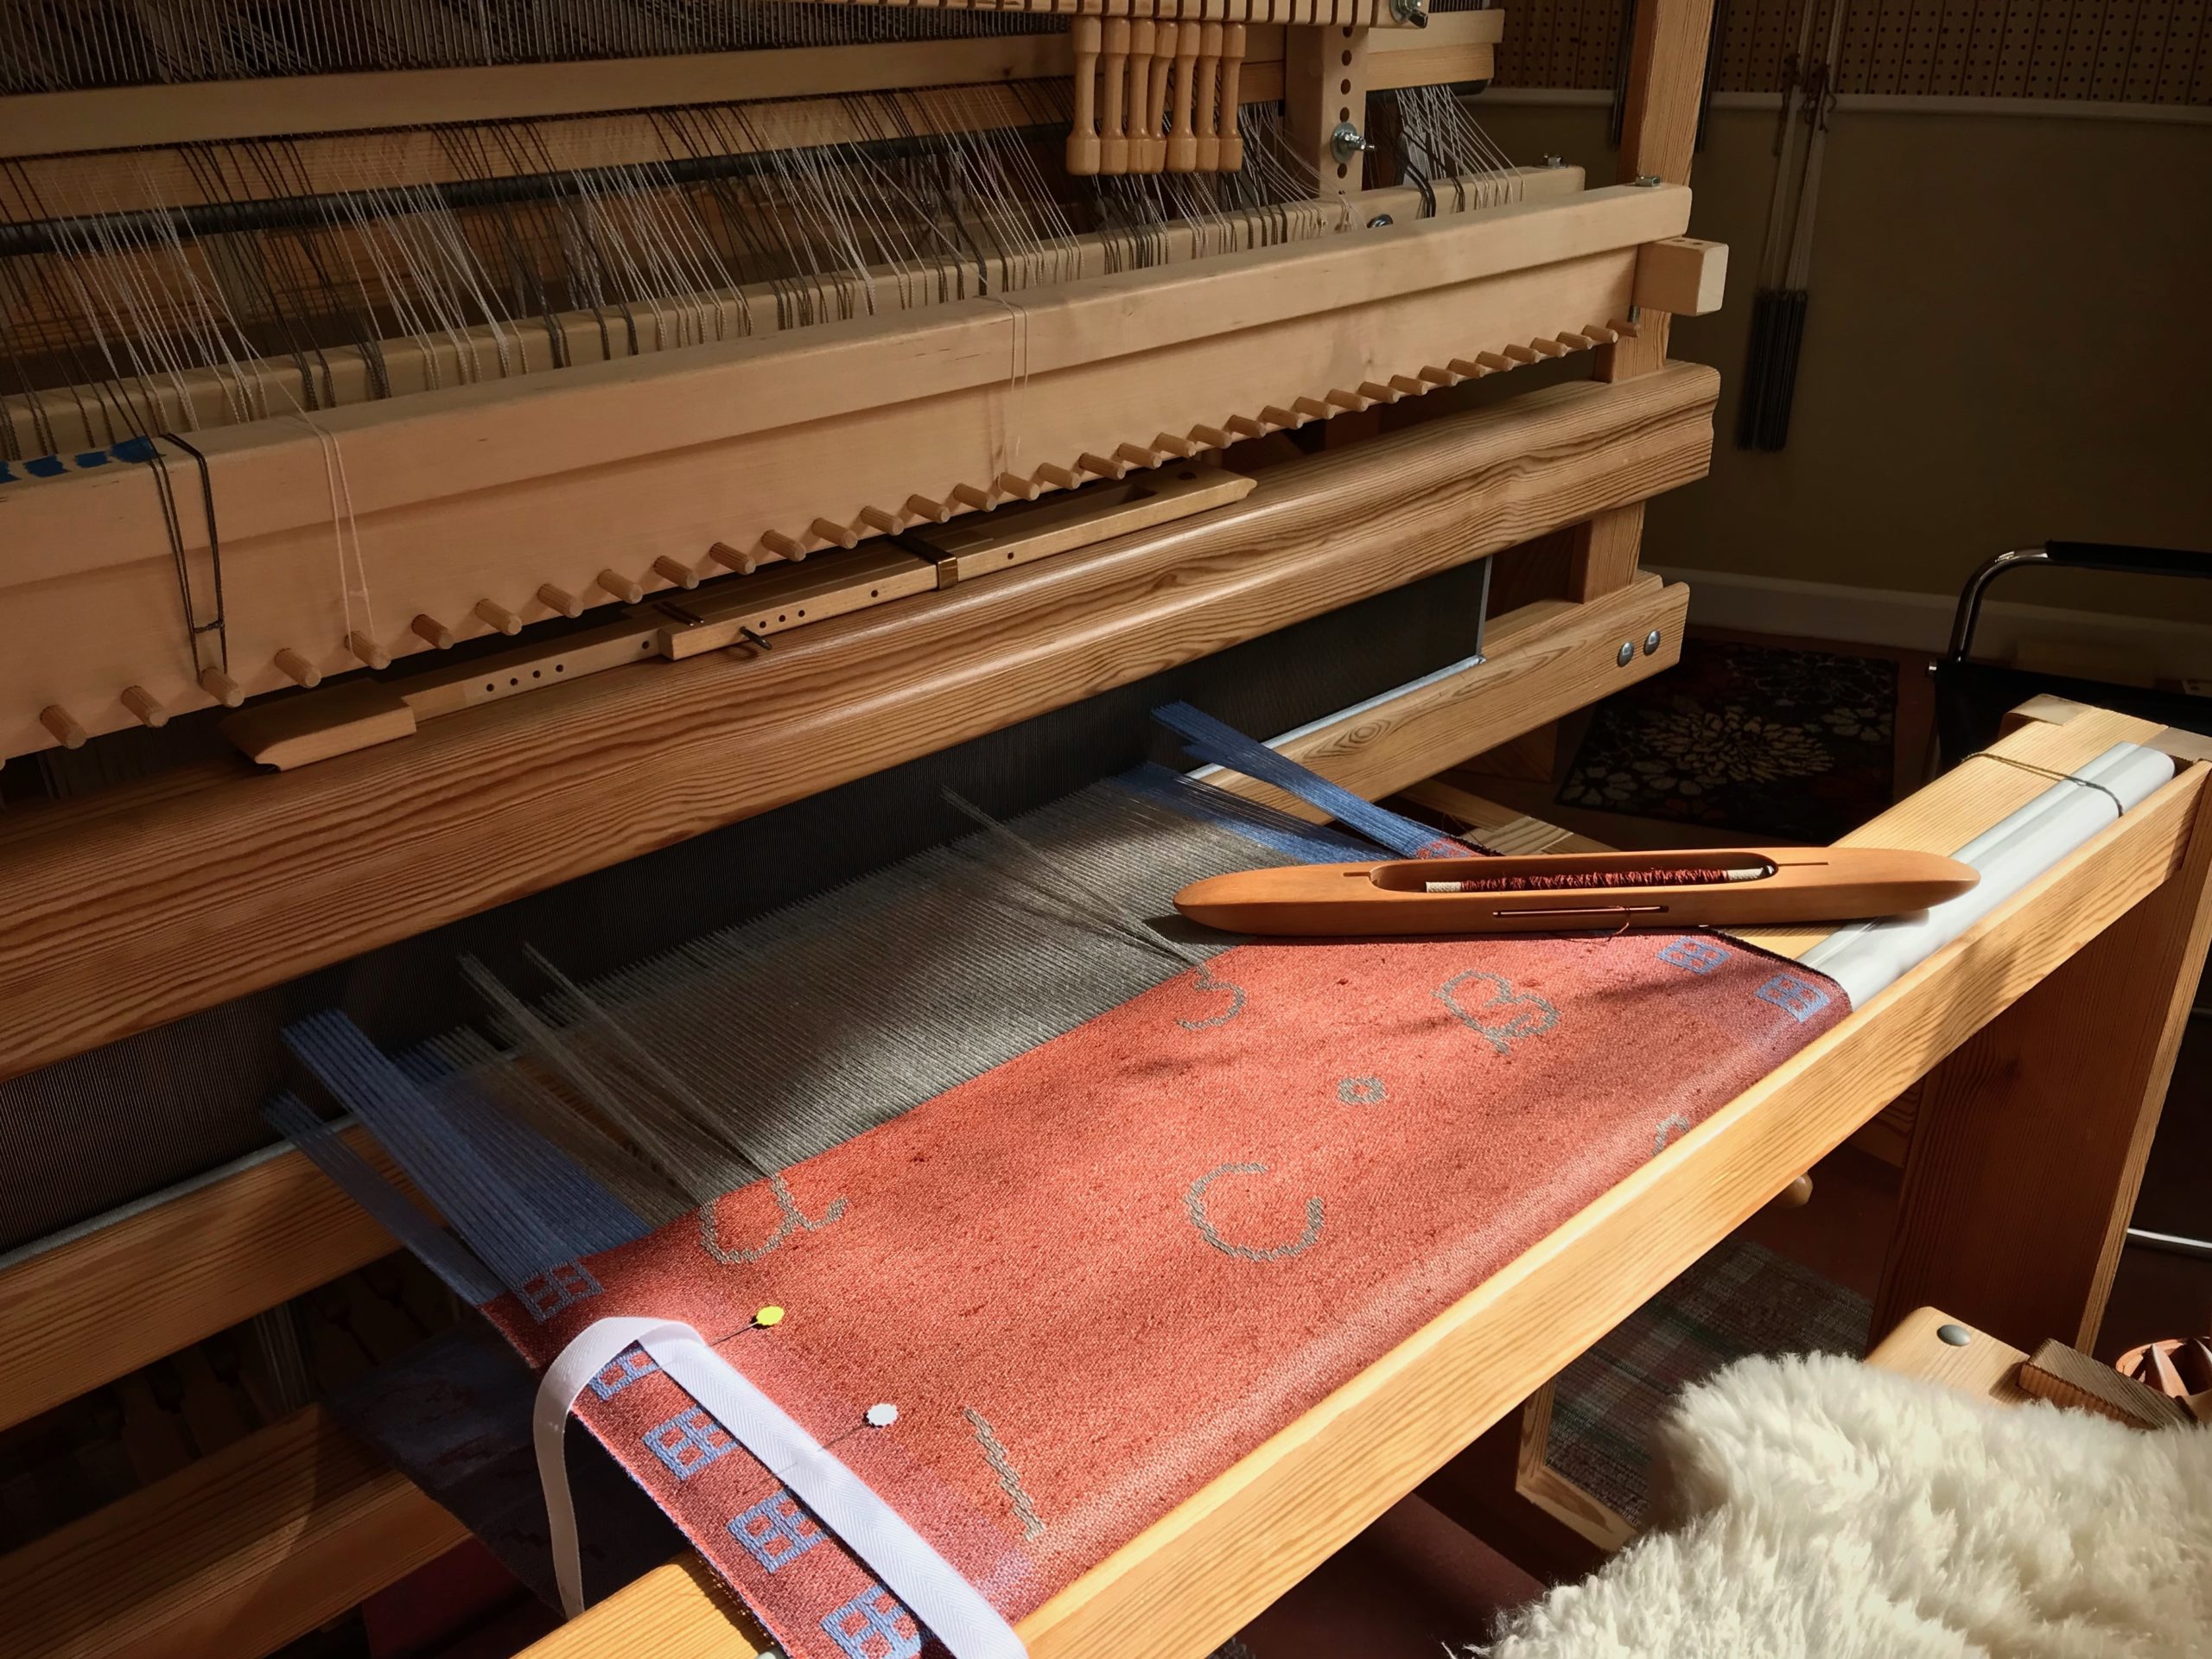 Combination drawloom for weaving towels.